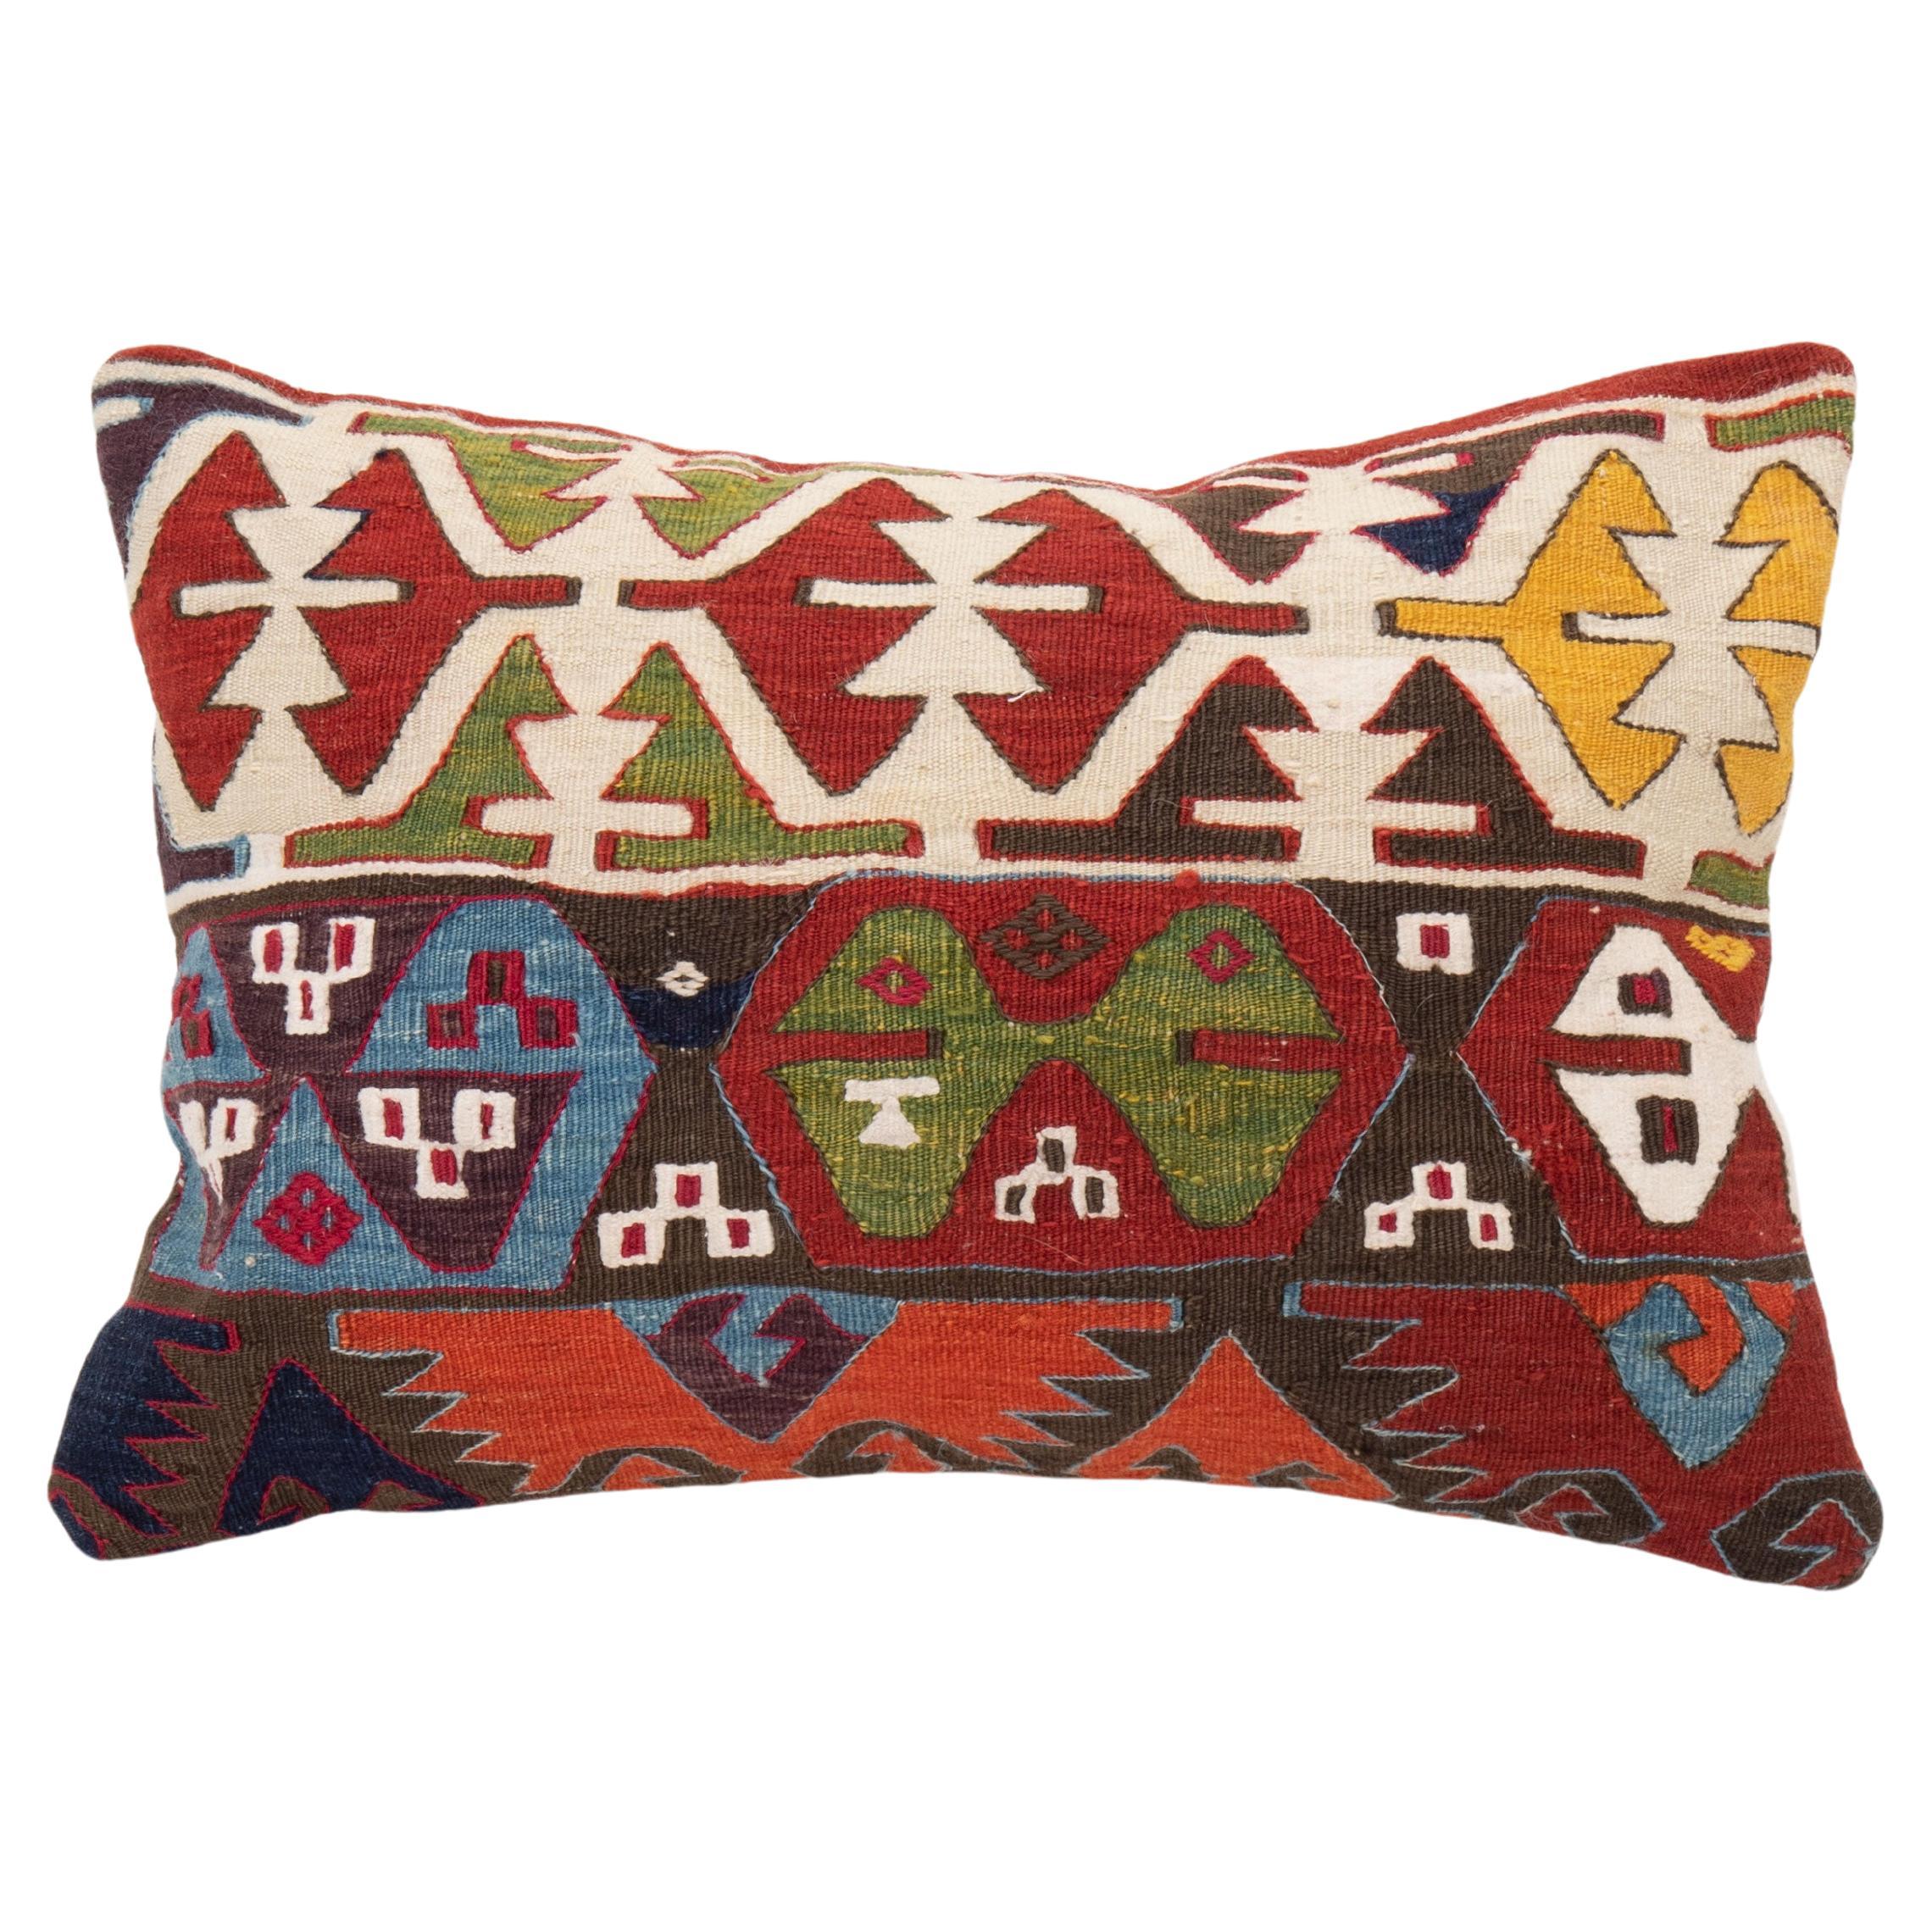 Kidney Pillow Case Made from an Antique Anatolian Kilim